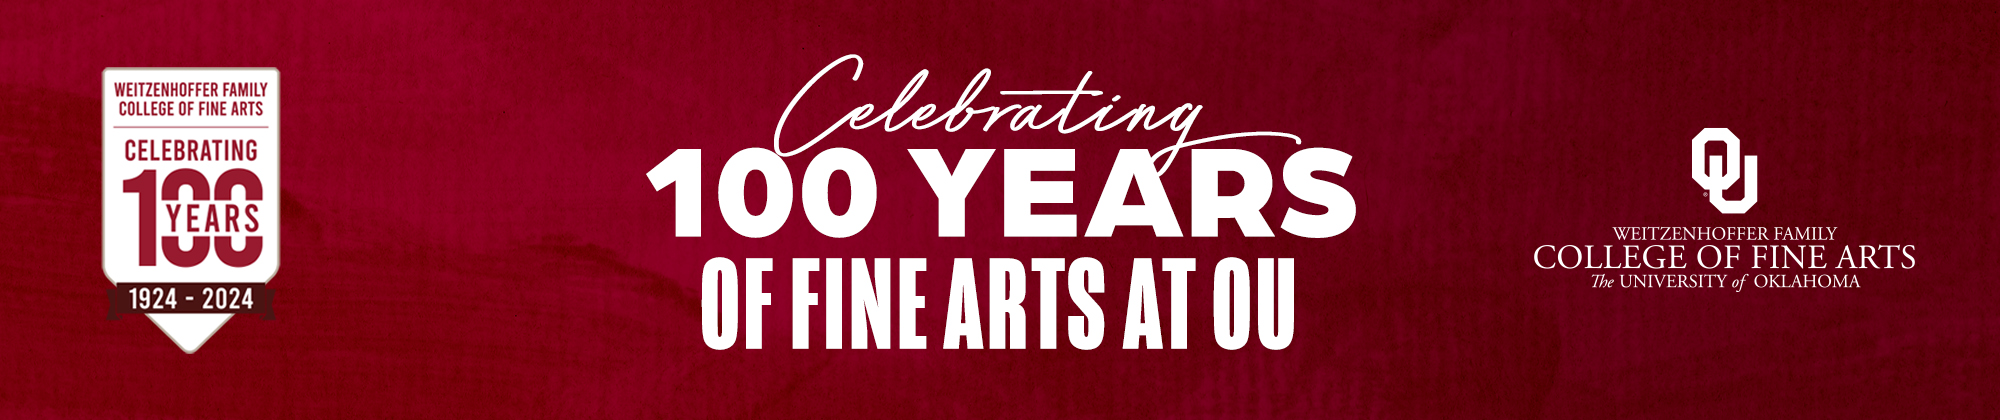 Celebrating 100 Years of Fine Arts at OU